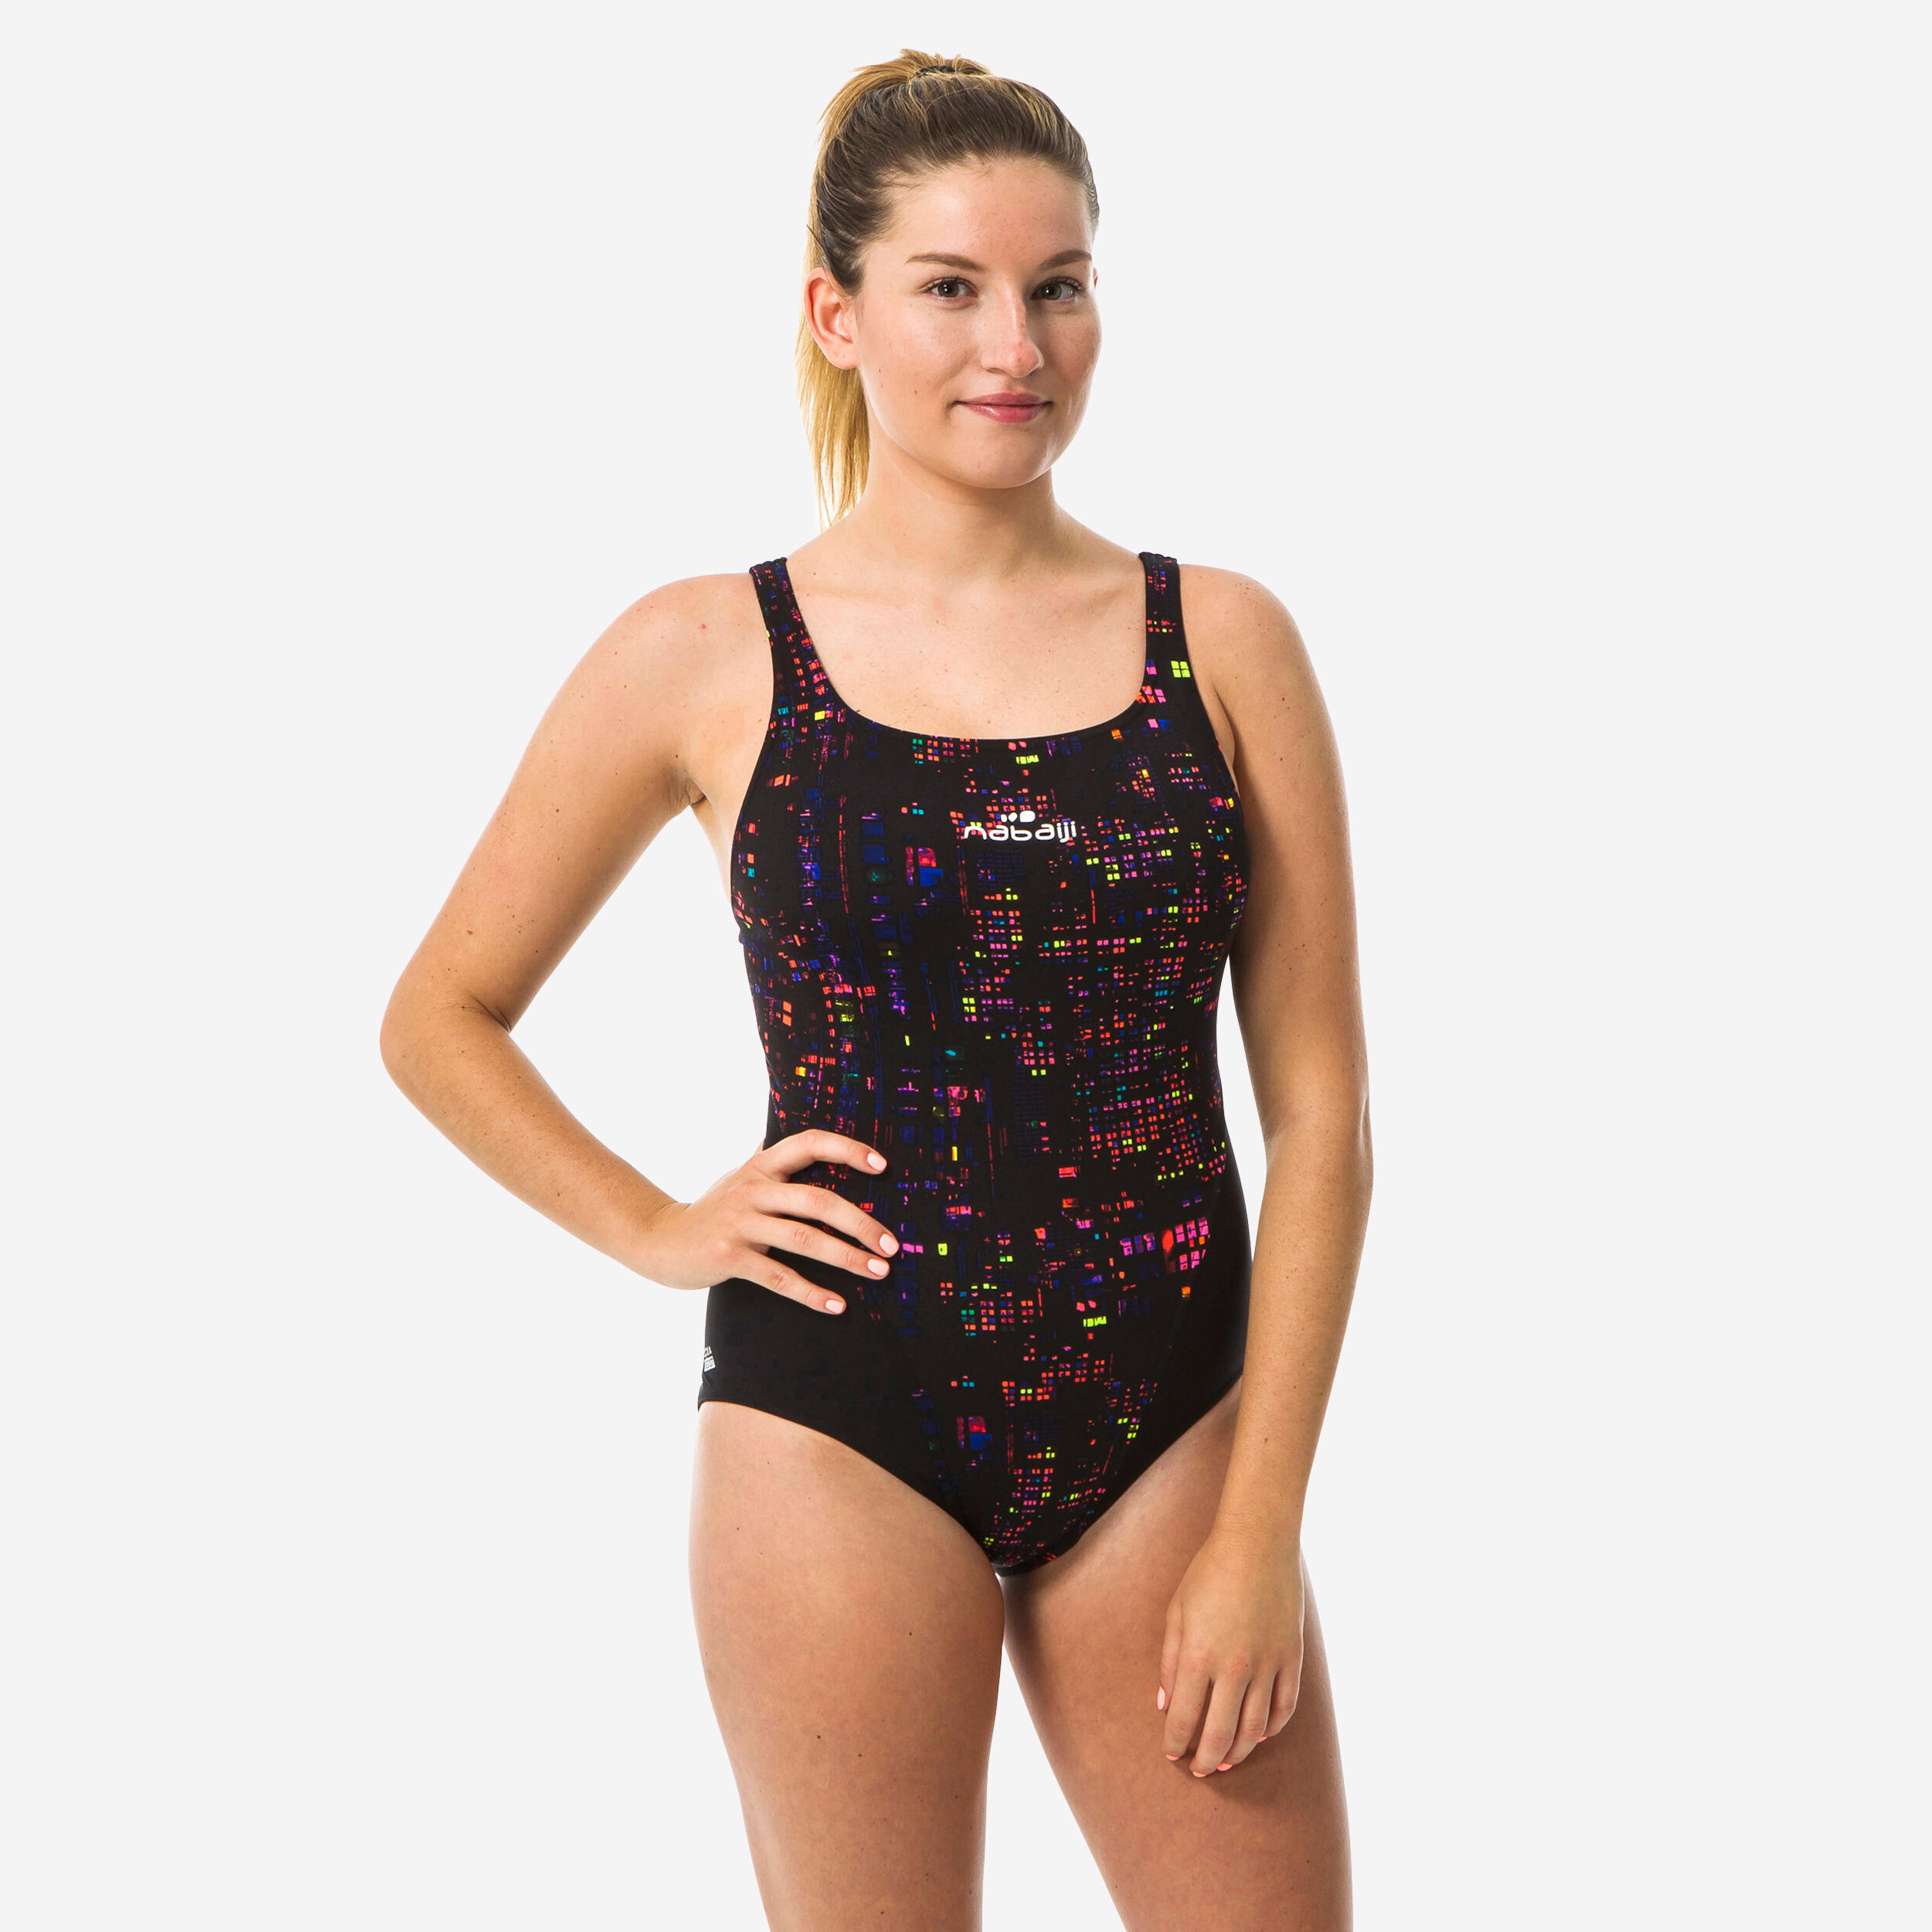 Chlorine Resistant Swimwear for Pool Workouts